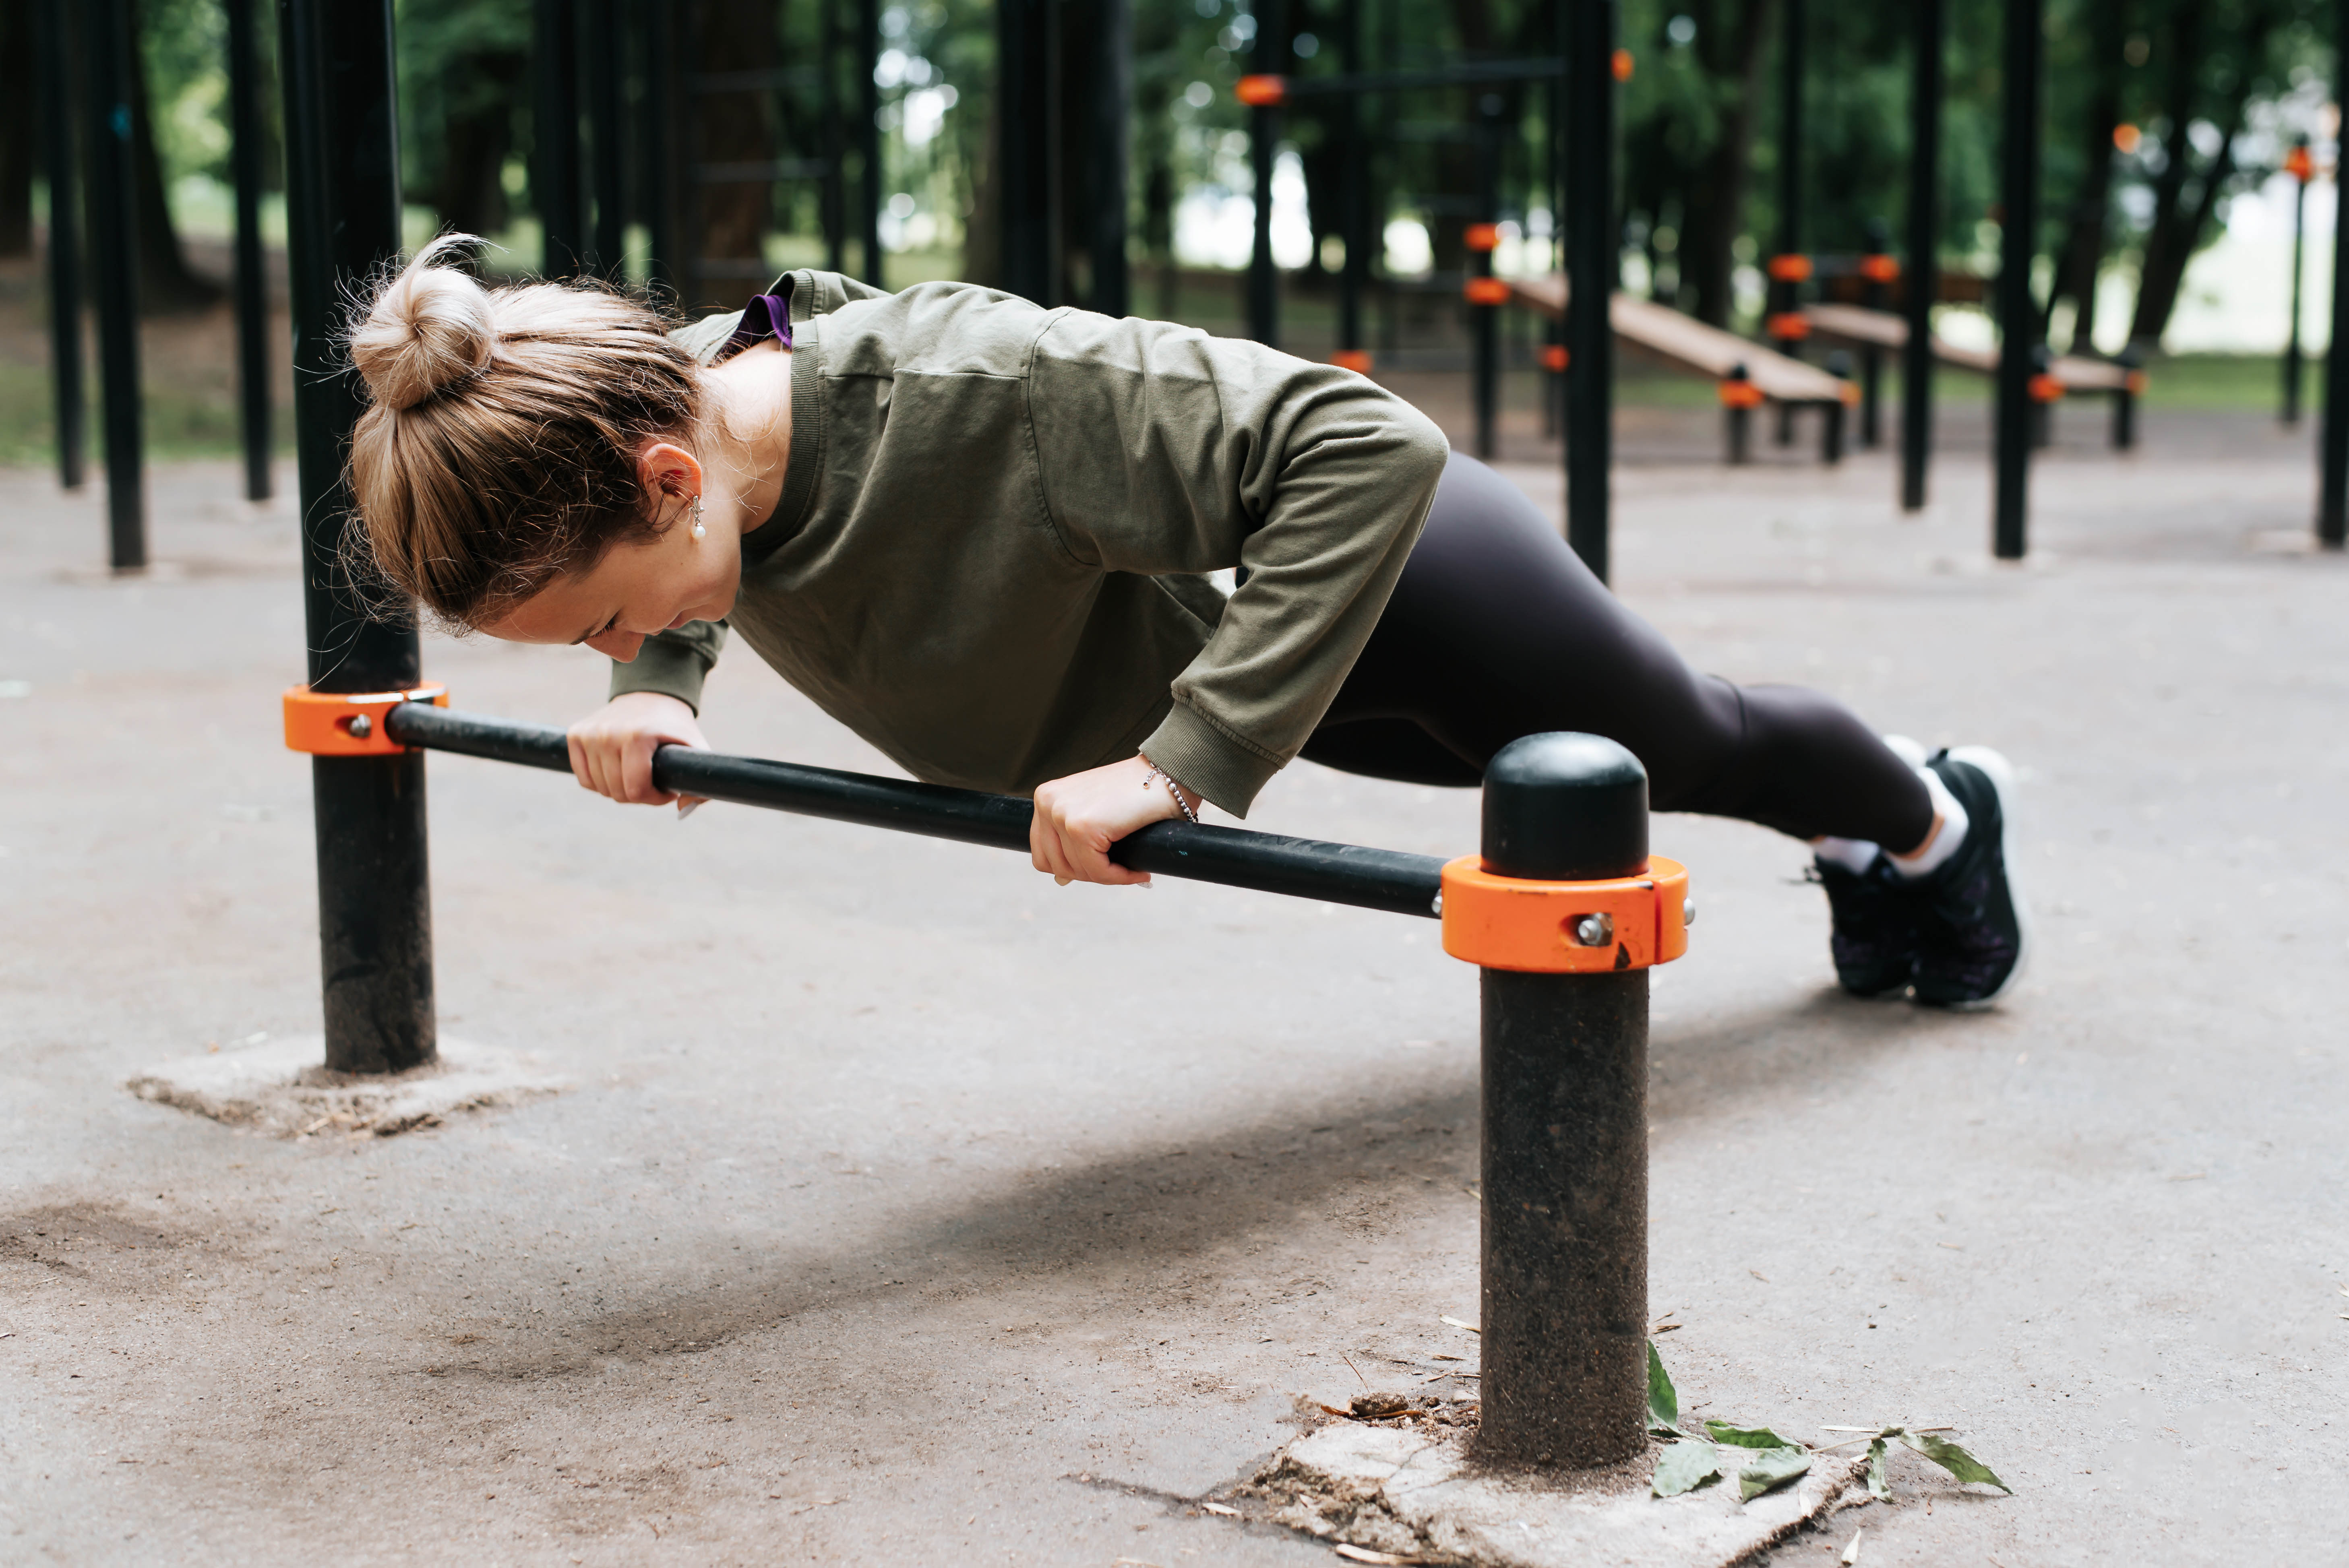 Young ,active woman completes push-ups using a bar installed in an outdoor workout space